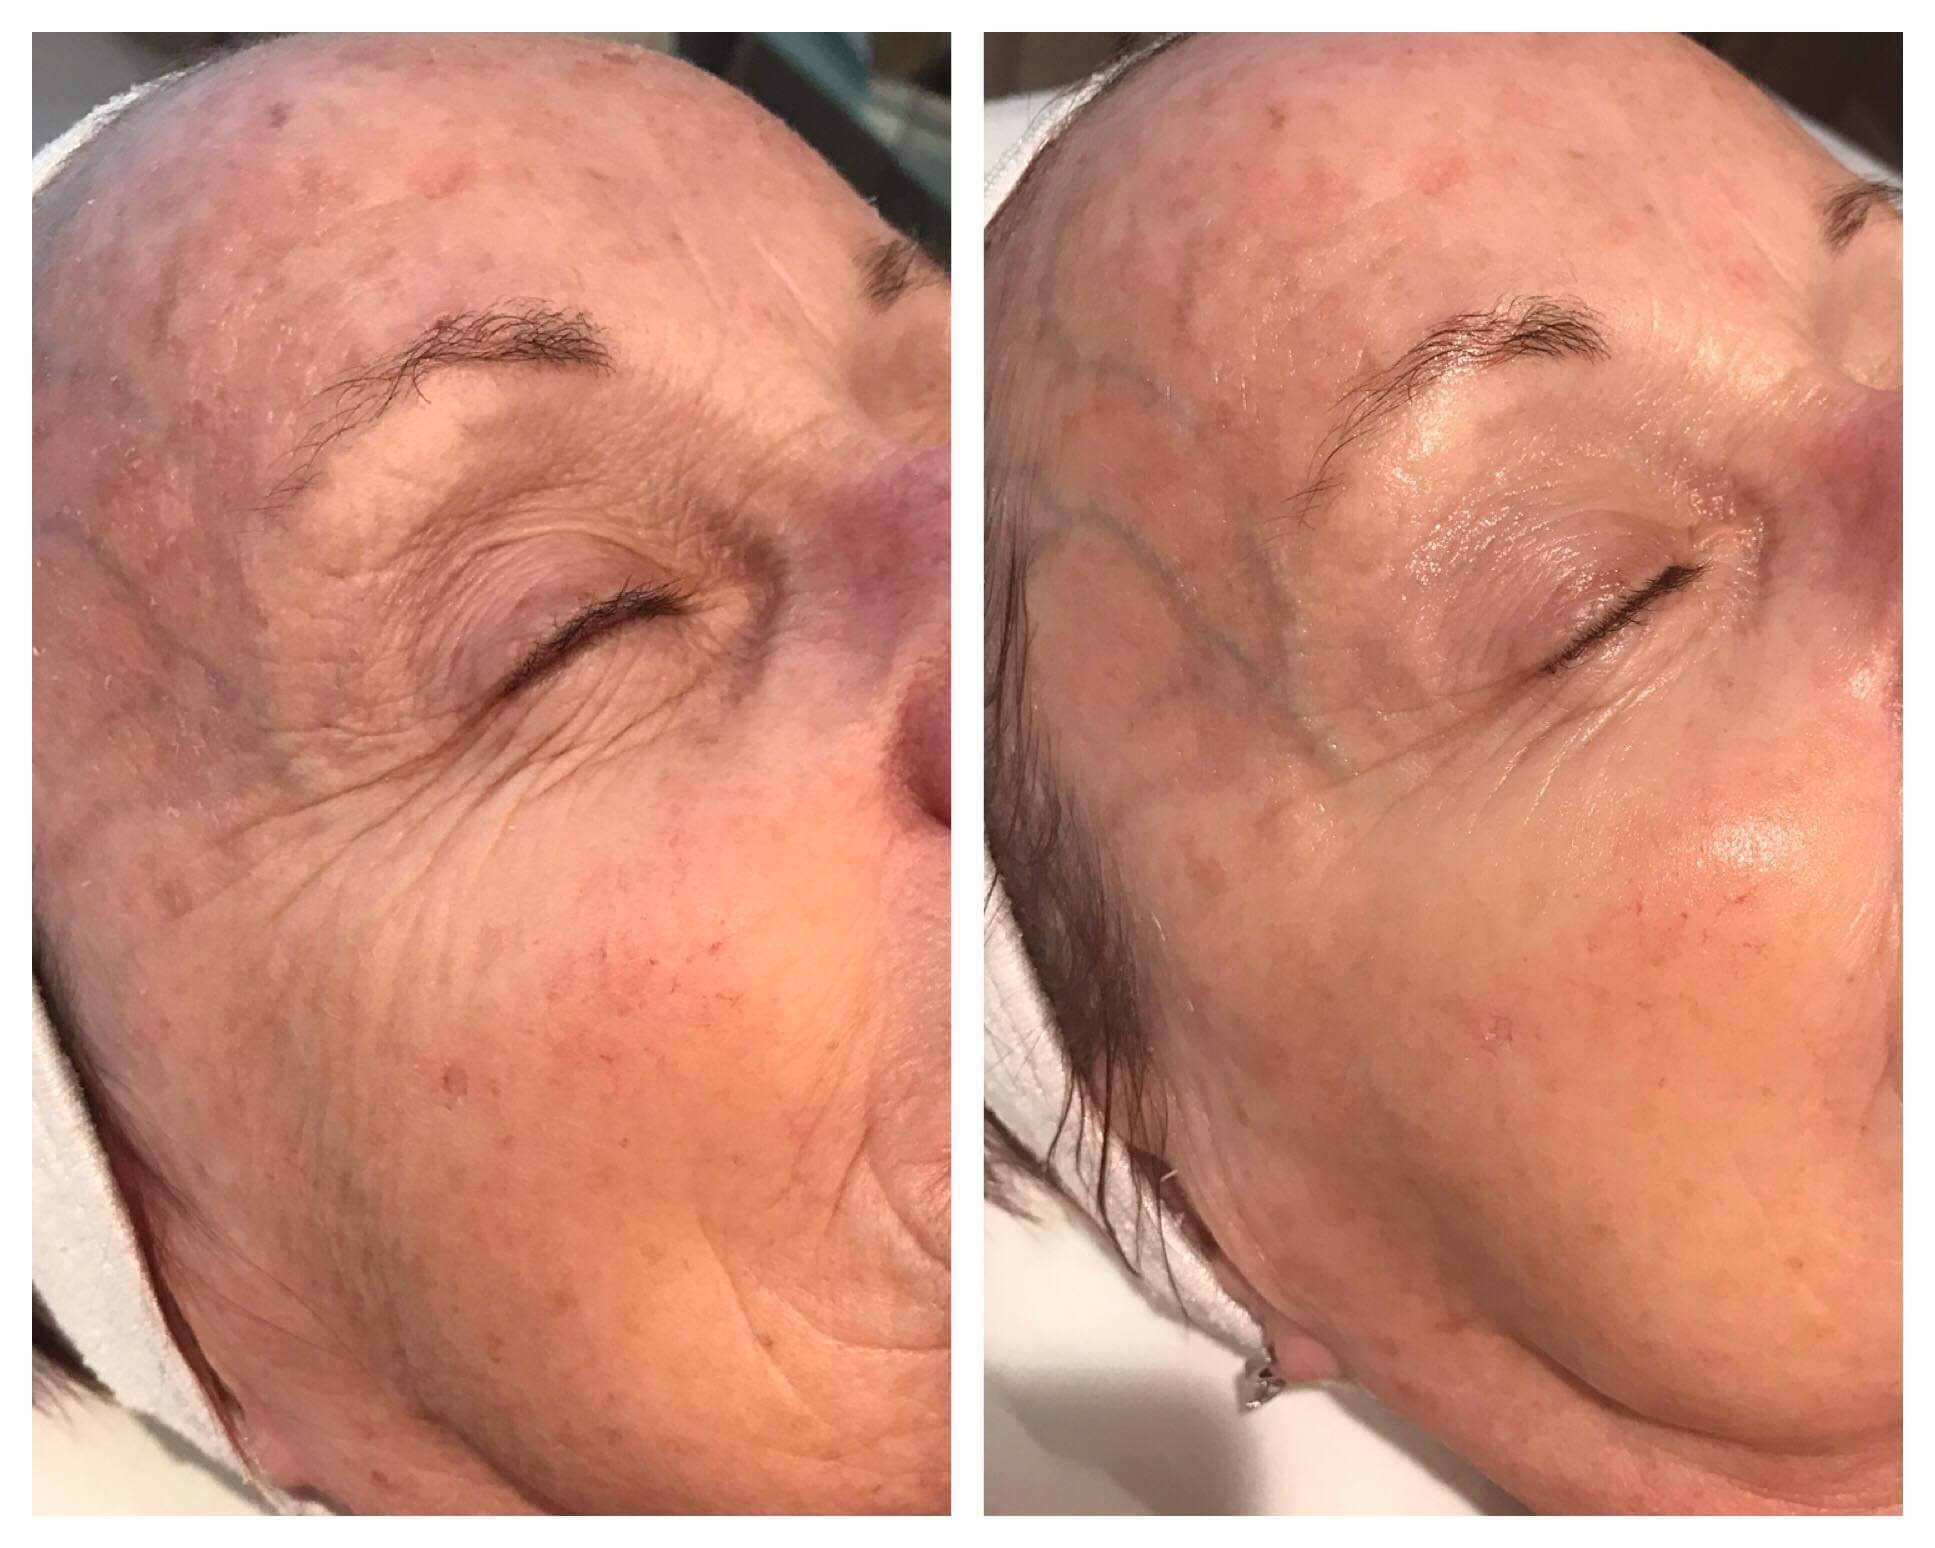 Before and After Nano Needling. Reduction of wrinkles.